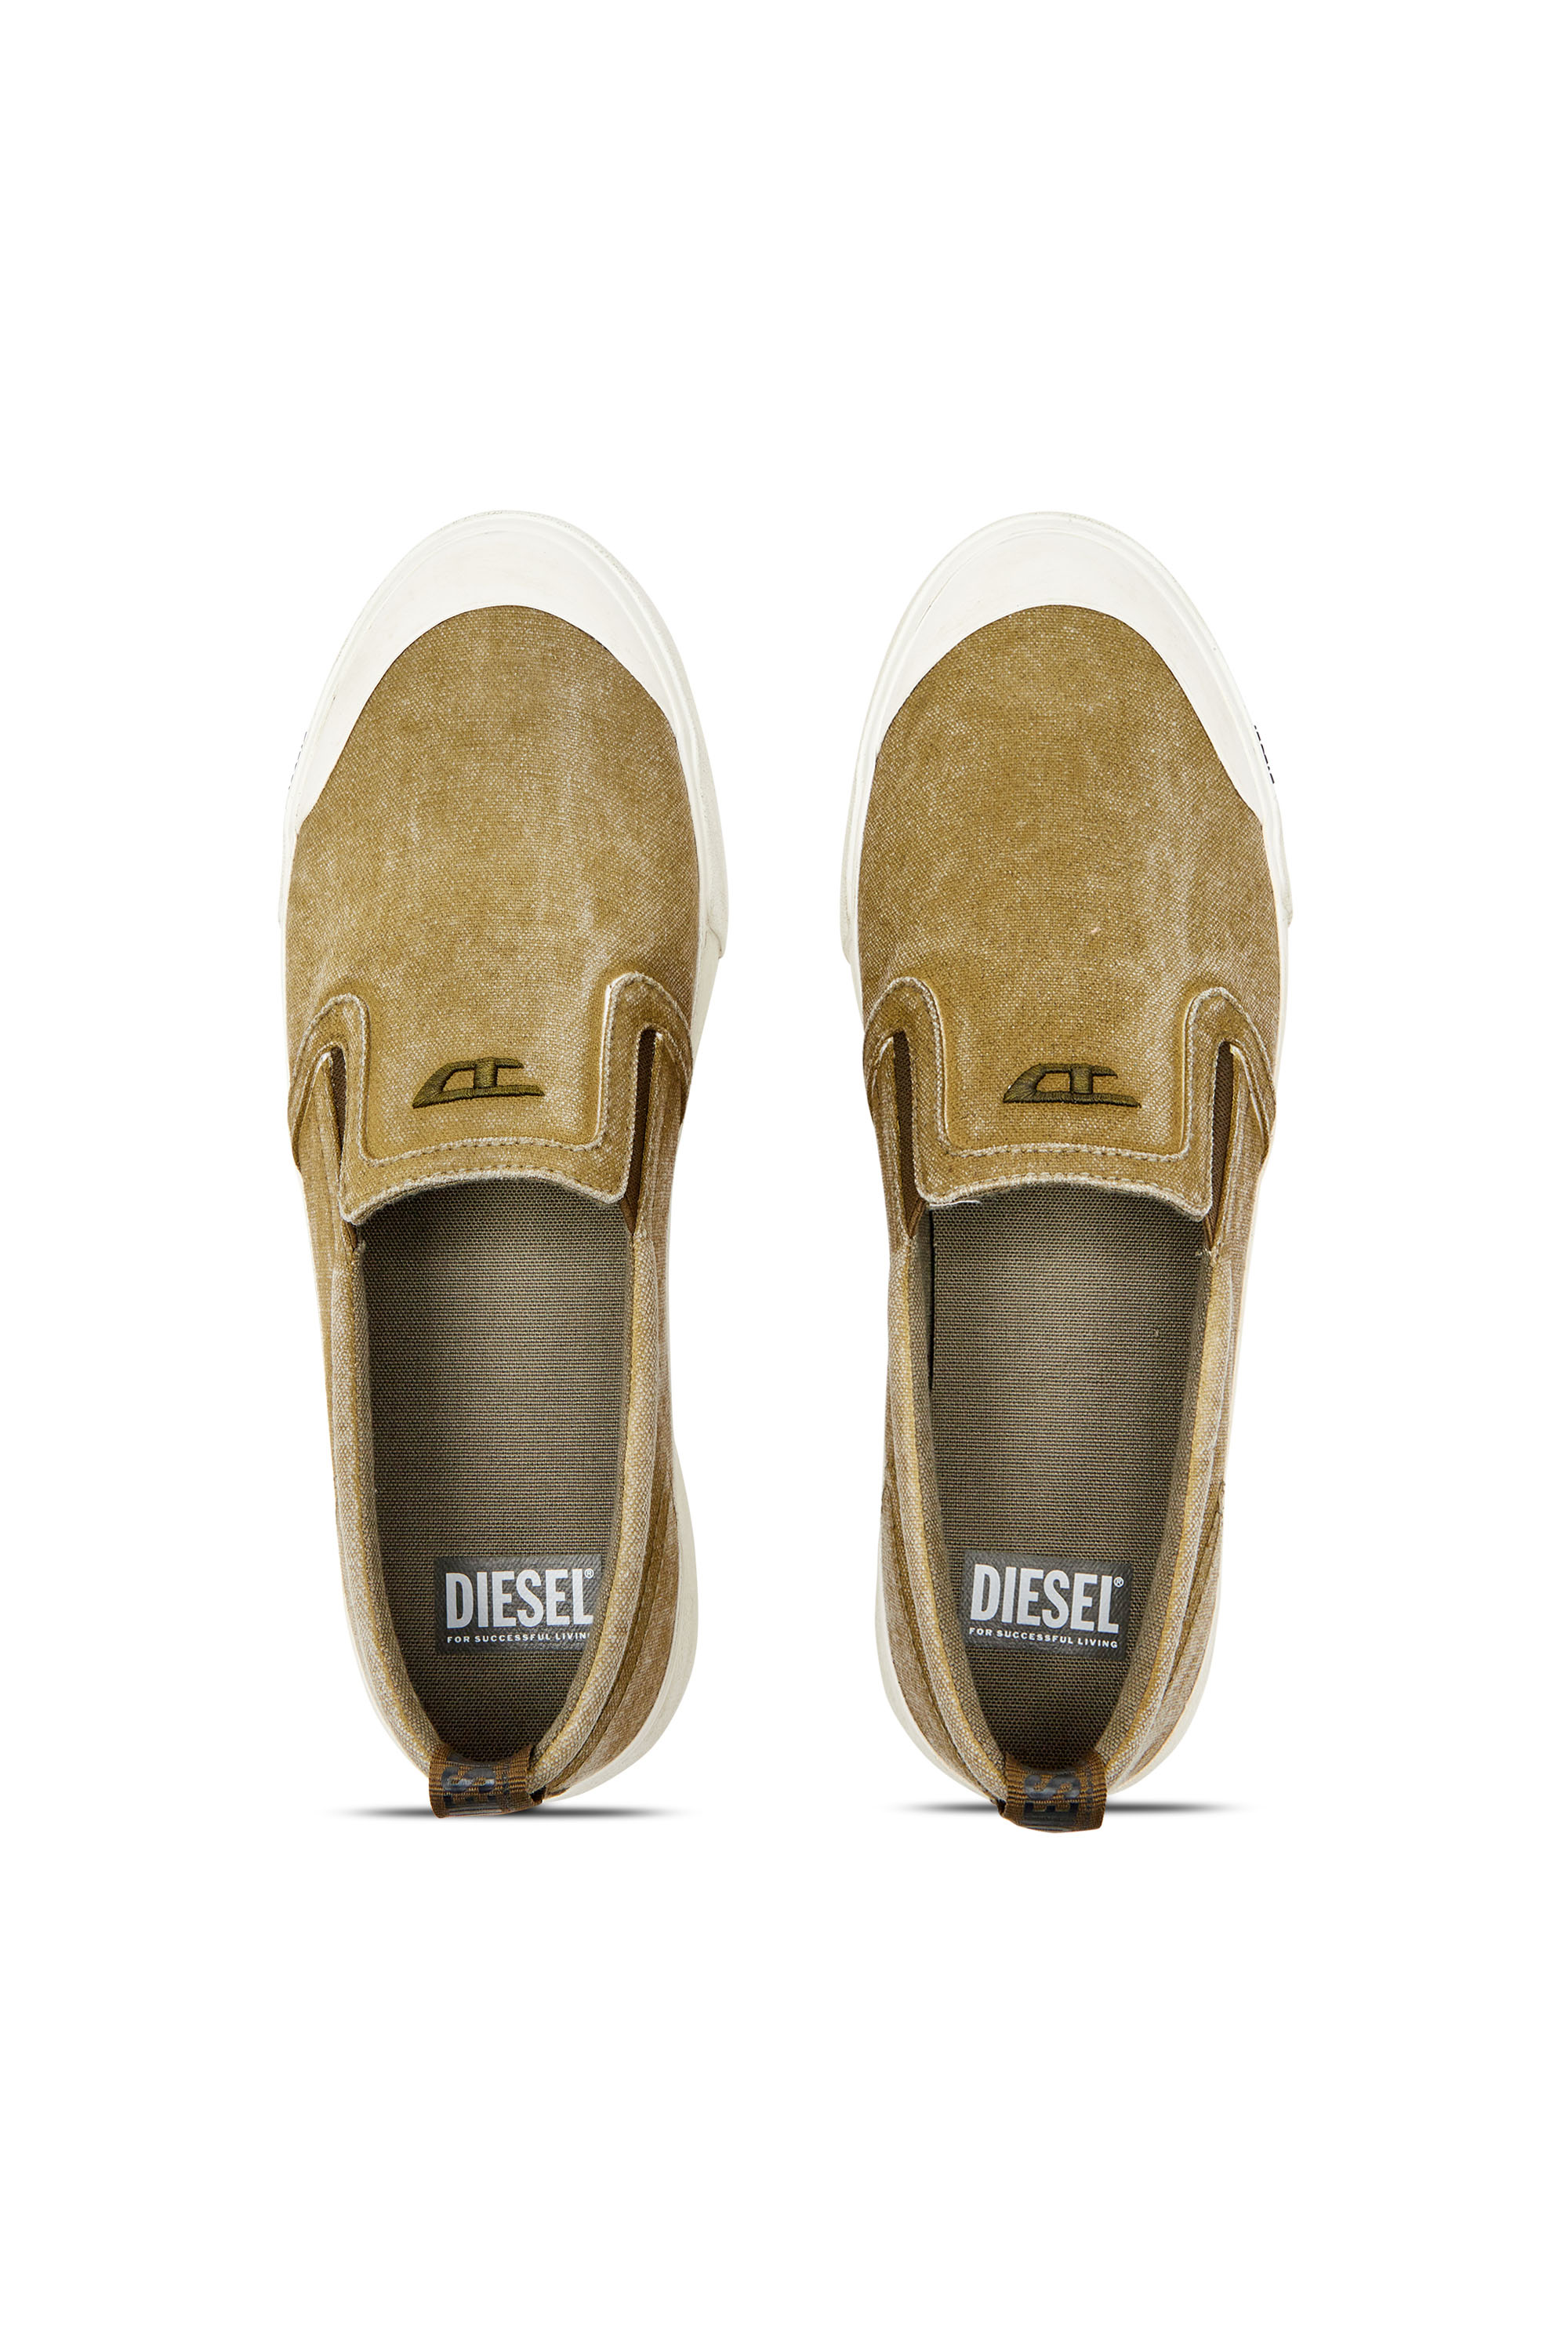 Diesel - S-ATHOS SLIP ON, Man Canvas slip-on sneakers with D embroidery in Brown - Image 6